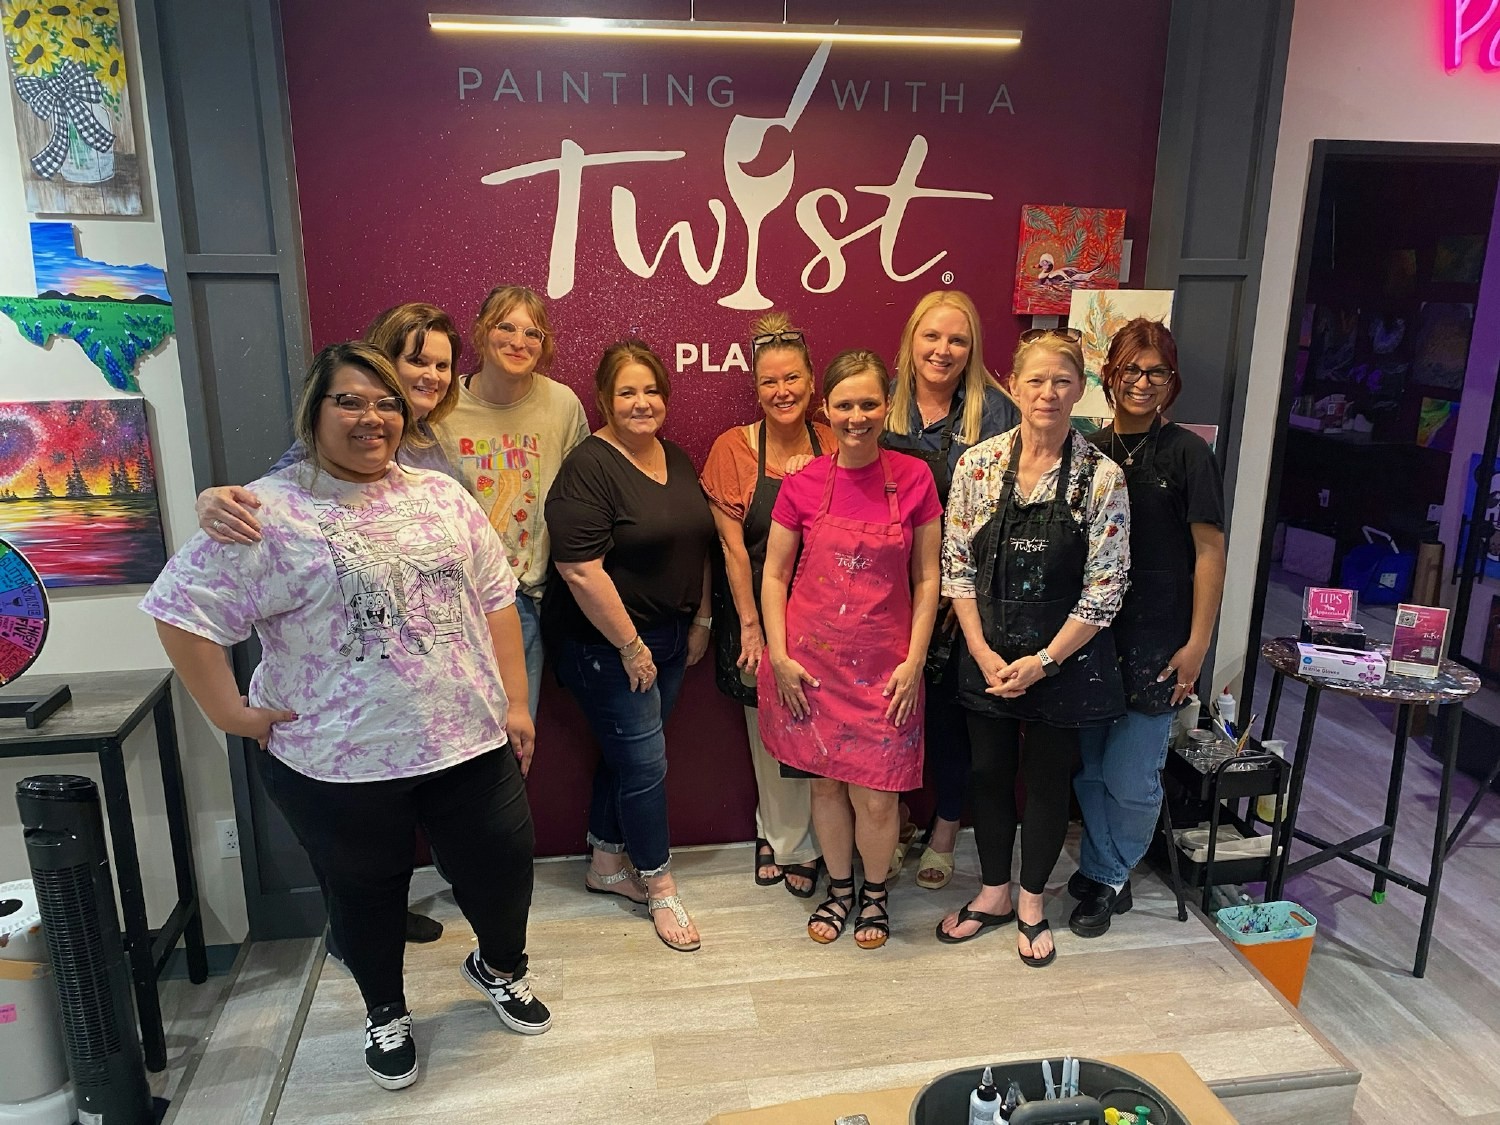 Cardinal Ladies' Night Out at Paint with a Twist